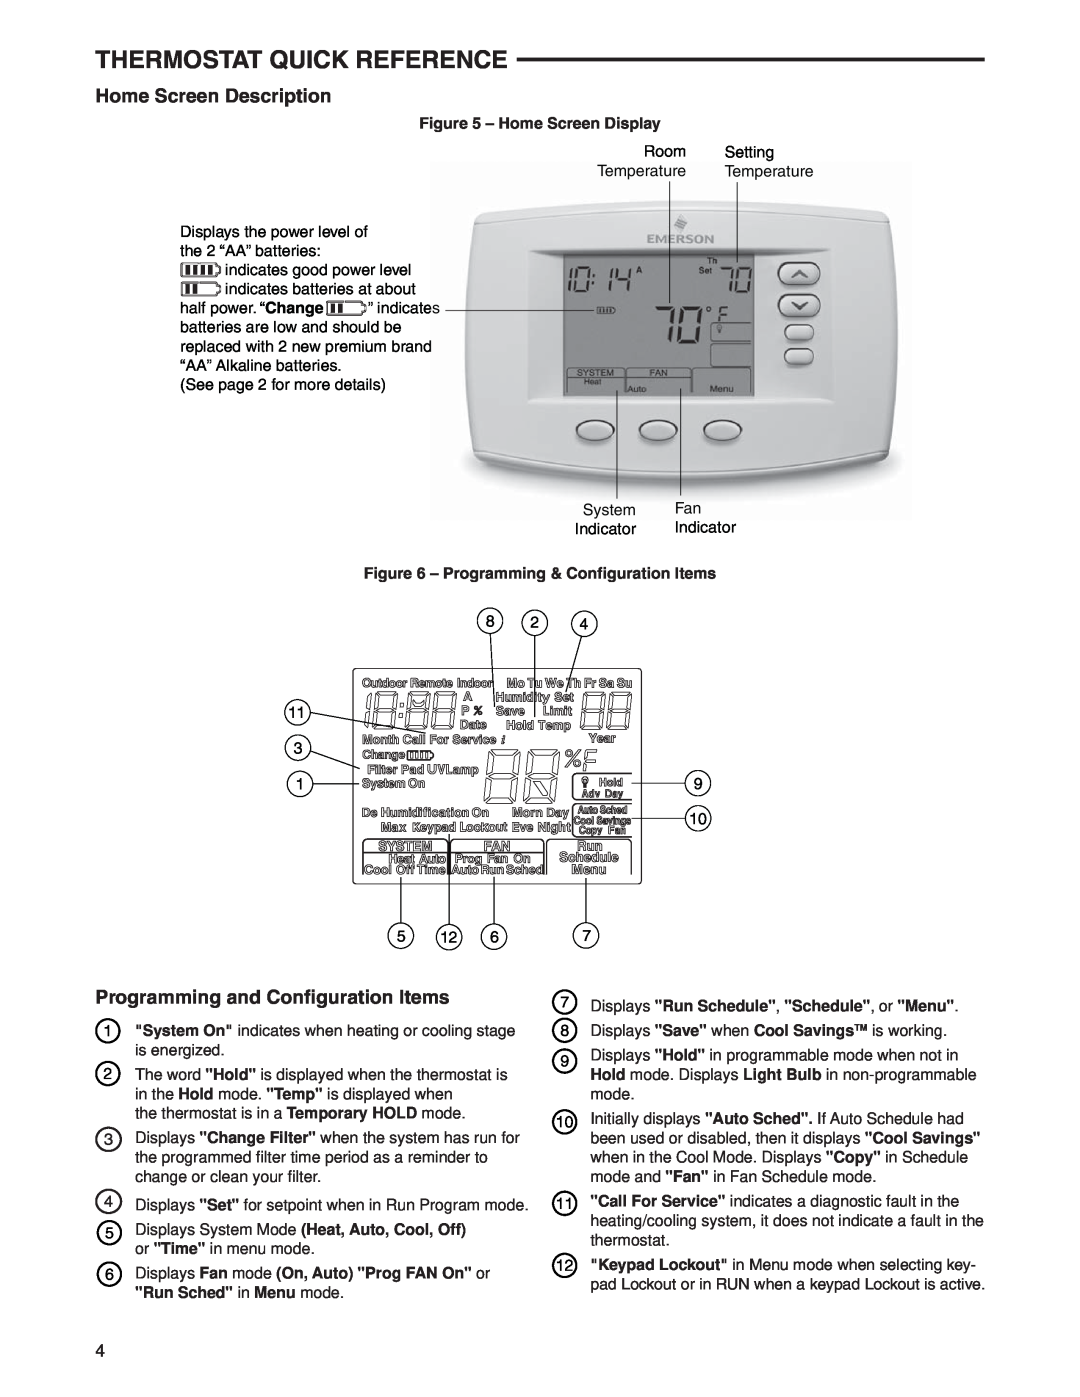 White Rodgers 1F97-0671 Thermostat Quick Reference, Home Screen Description, Programming and Conﬁguration Items 